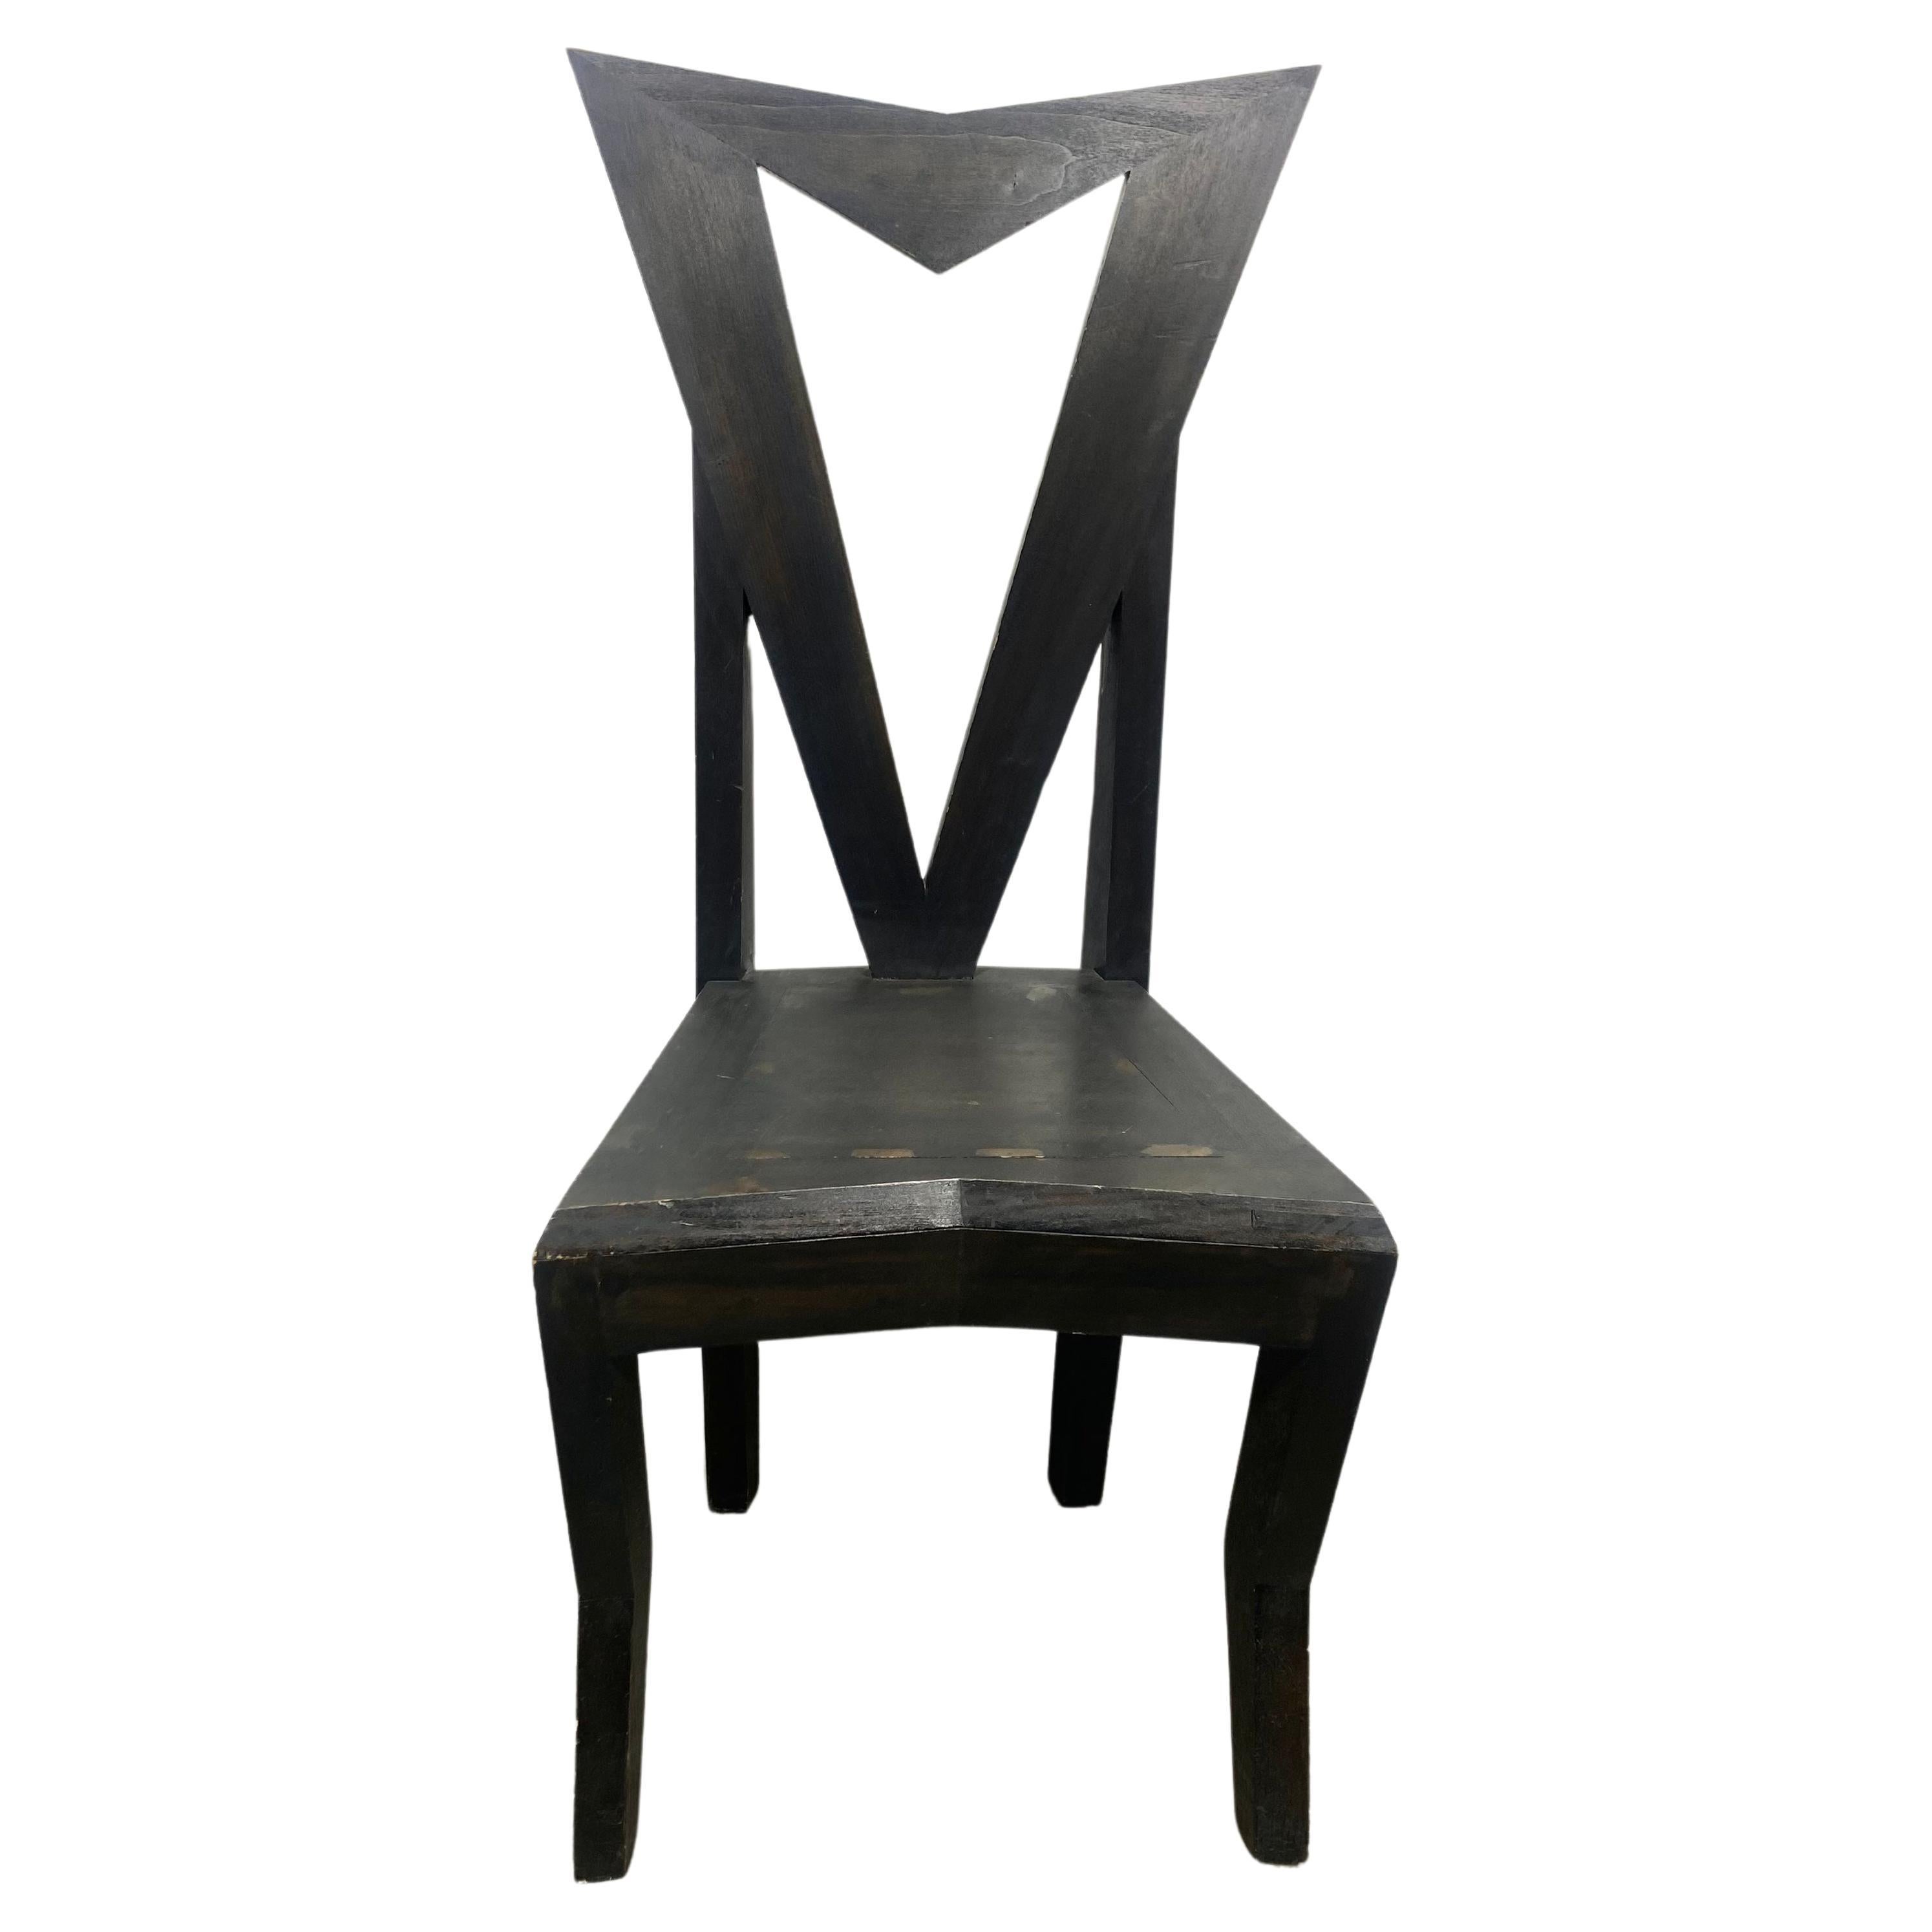 Czech Cubist Side Chair design by Pavel Janak for Modernista For Sale